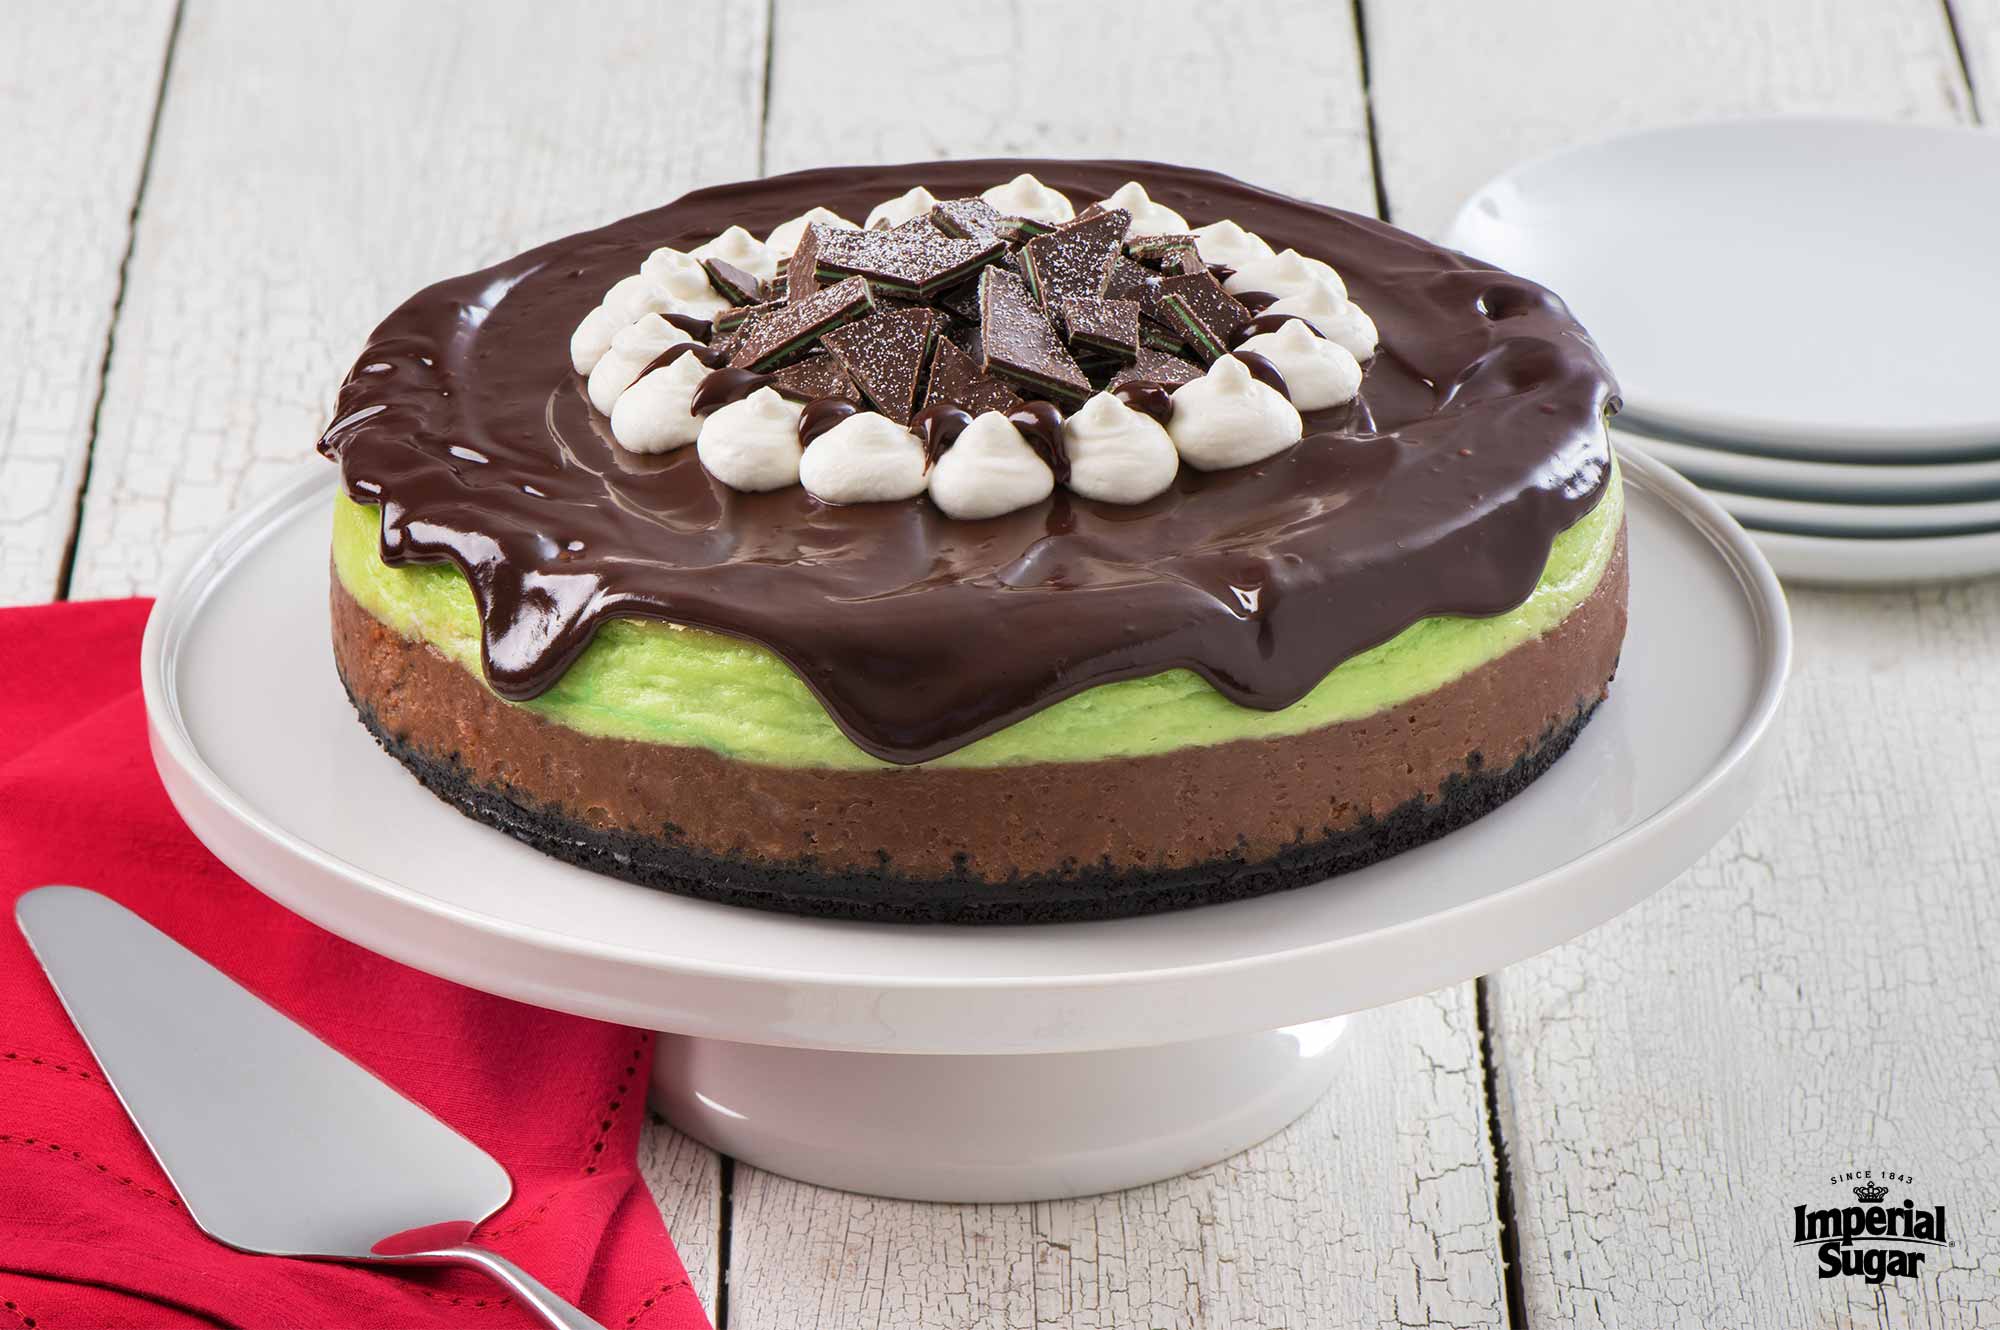 https://www.dixiecrystals.com/sites/default/files/recipe/Chocolate-Mint-Cheesecake-imperial.jpg